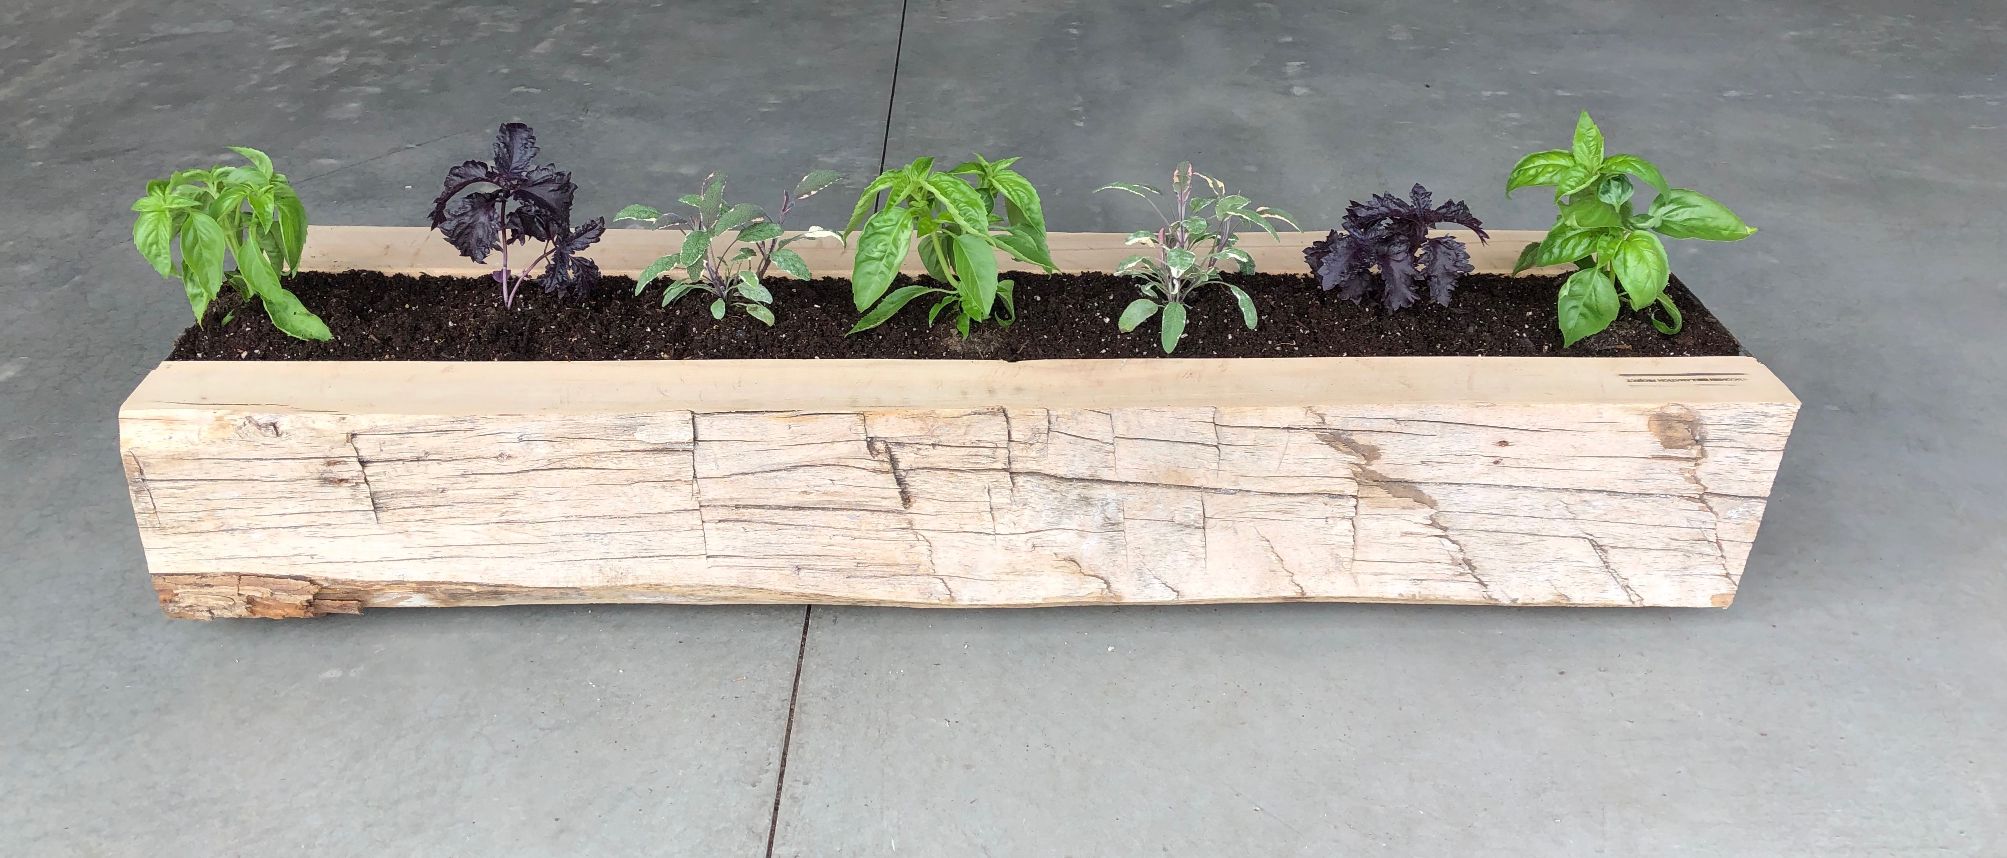 Reclaimed Wood Garden and Plants